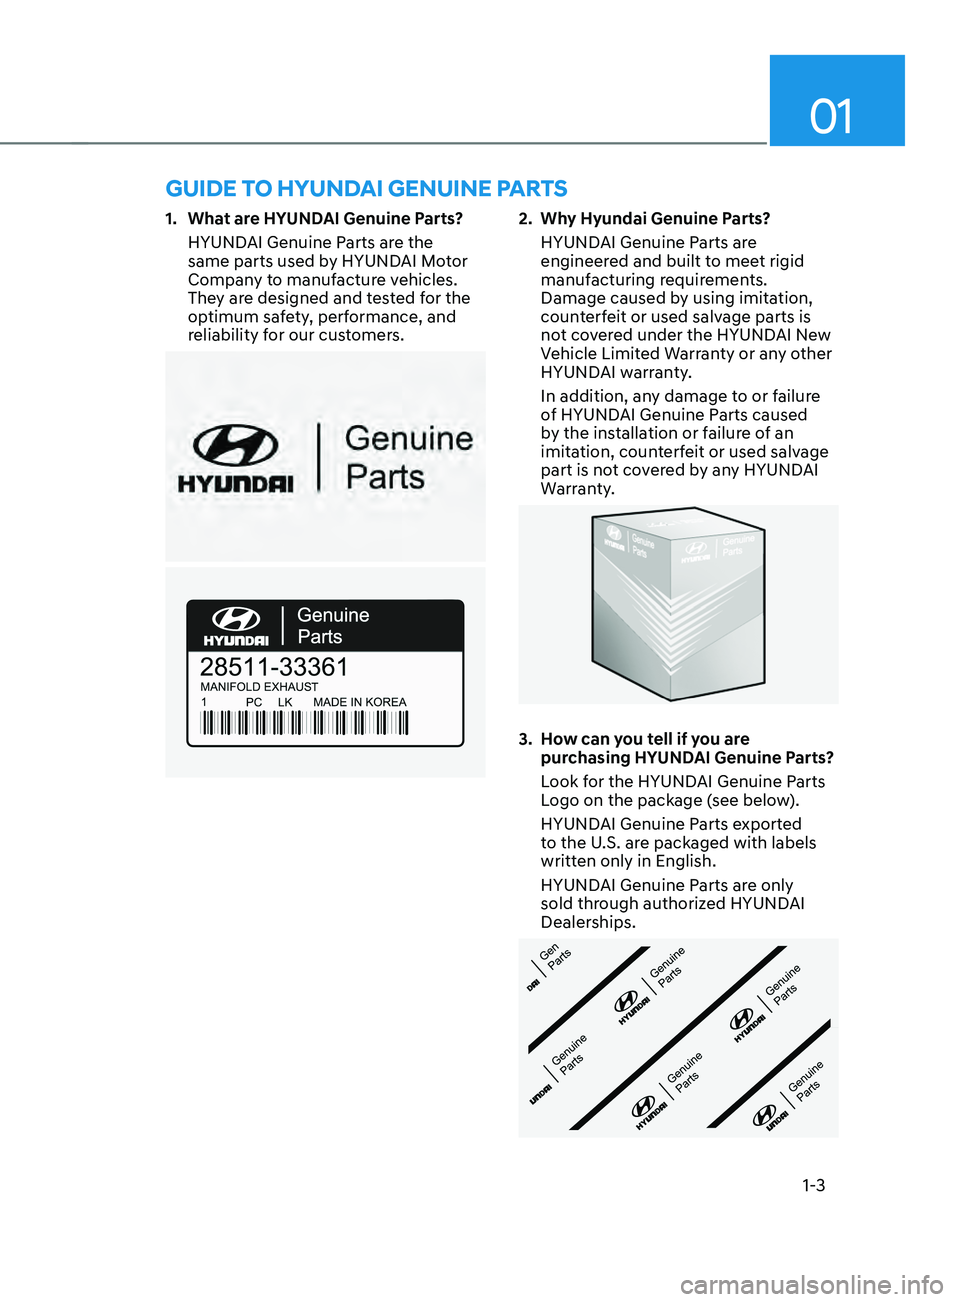 HYUNDAI SANTA FE LIMITED 2021  Owners Manual 01
1-3
GUIDE TO HYUNDAI GENUINE PARTS
1. What are HYUNDAI Genuine Parts?
HYUND
AI Genuine Parts are the 
same parts used by HYUNDAI Motor 
Company to manufacture vehicles. 
They are designed and teste